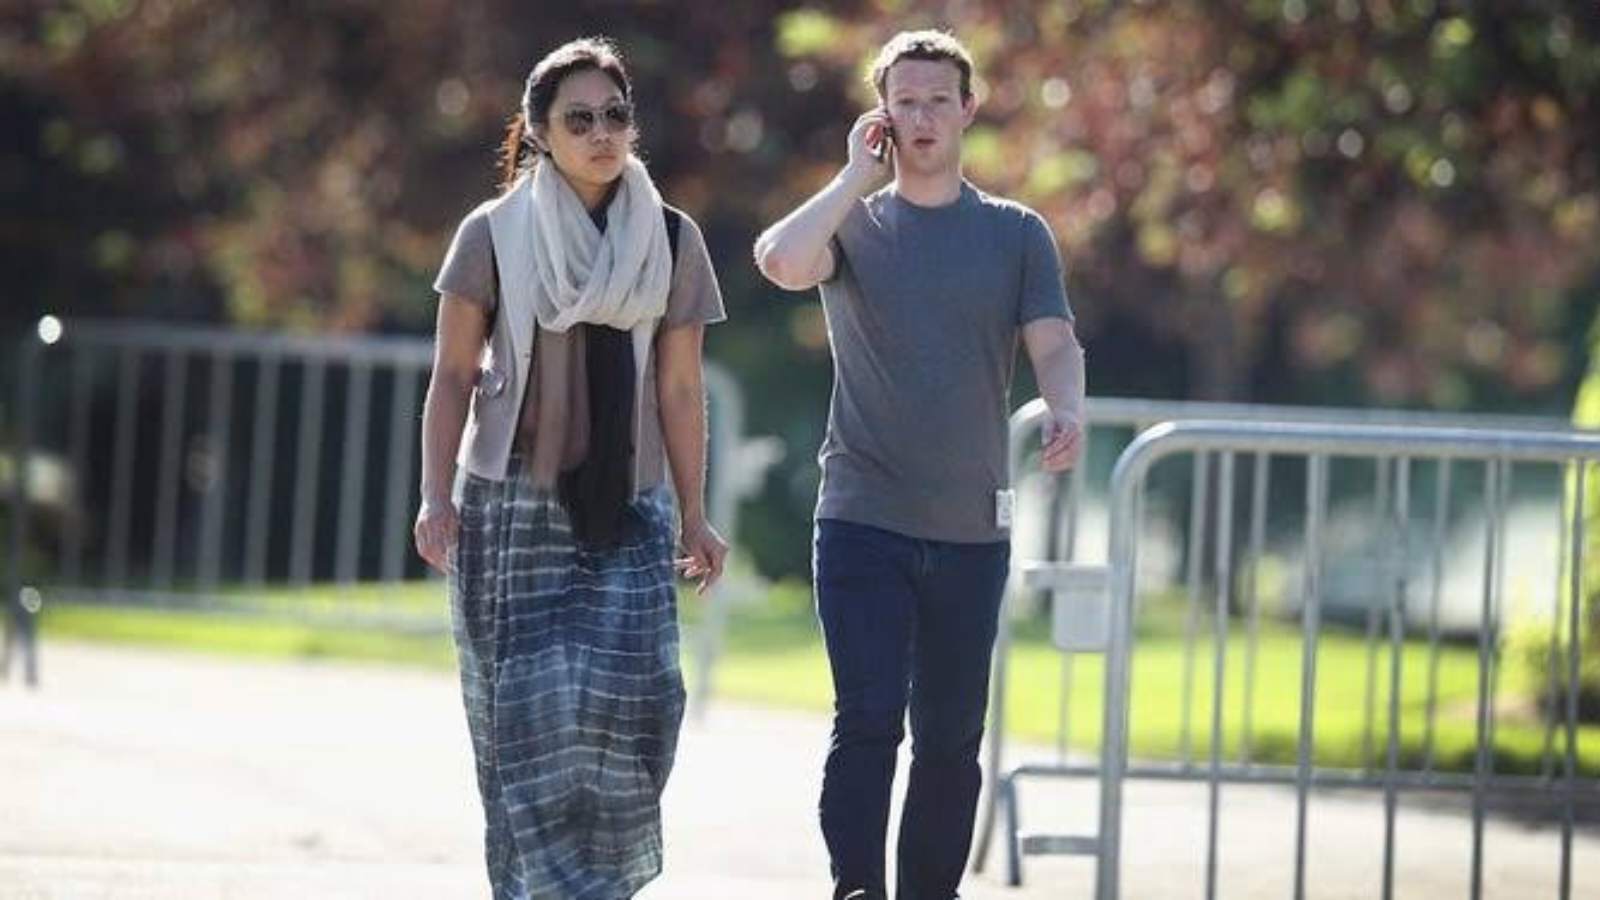 Mark Zuckerberg in his signature gray t-shirt and jeans